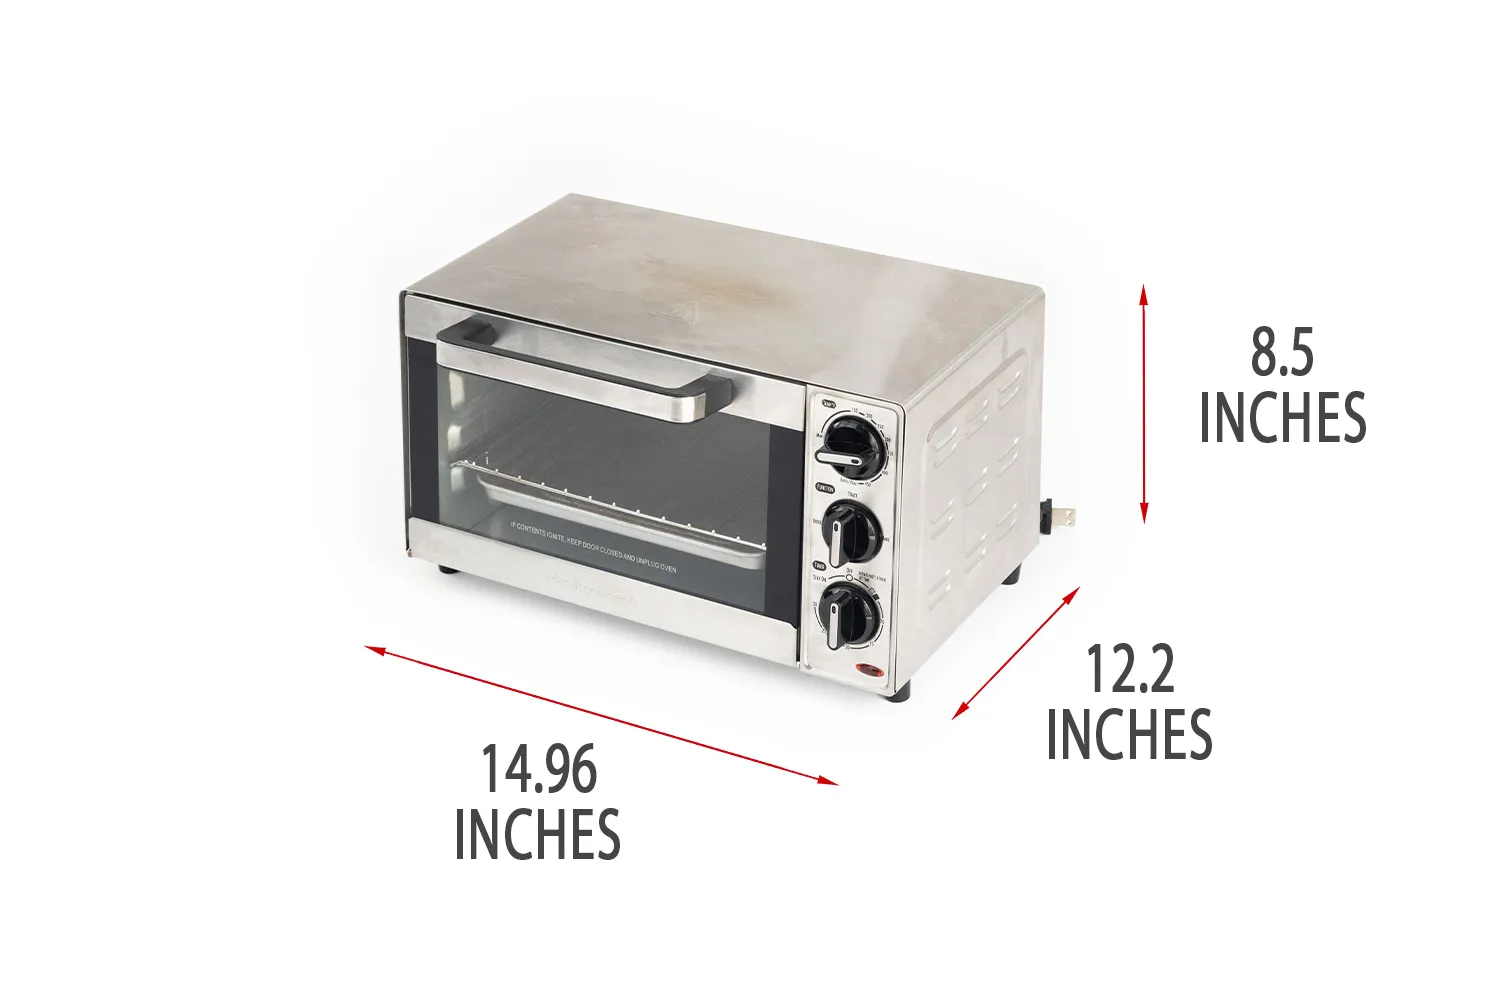 Hamilton Beach Countertop Toaster Oven & Pizza Maker Large 4-Slice  Capacity, Stainless Steel (31401) & Electric Tea Kettle, Water Boiler &  Heater, 1.7